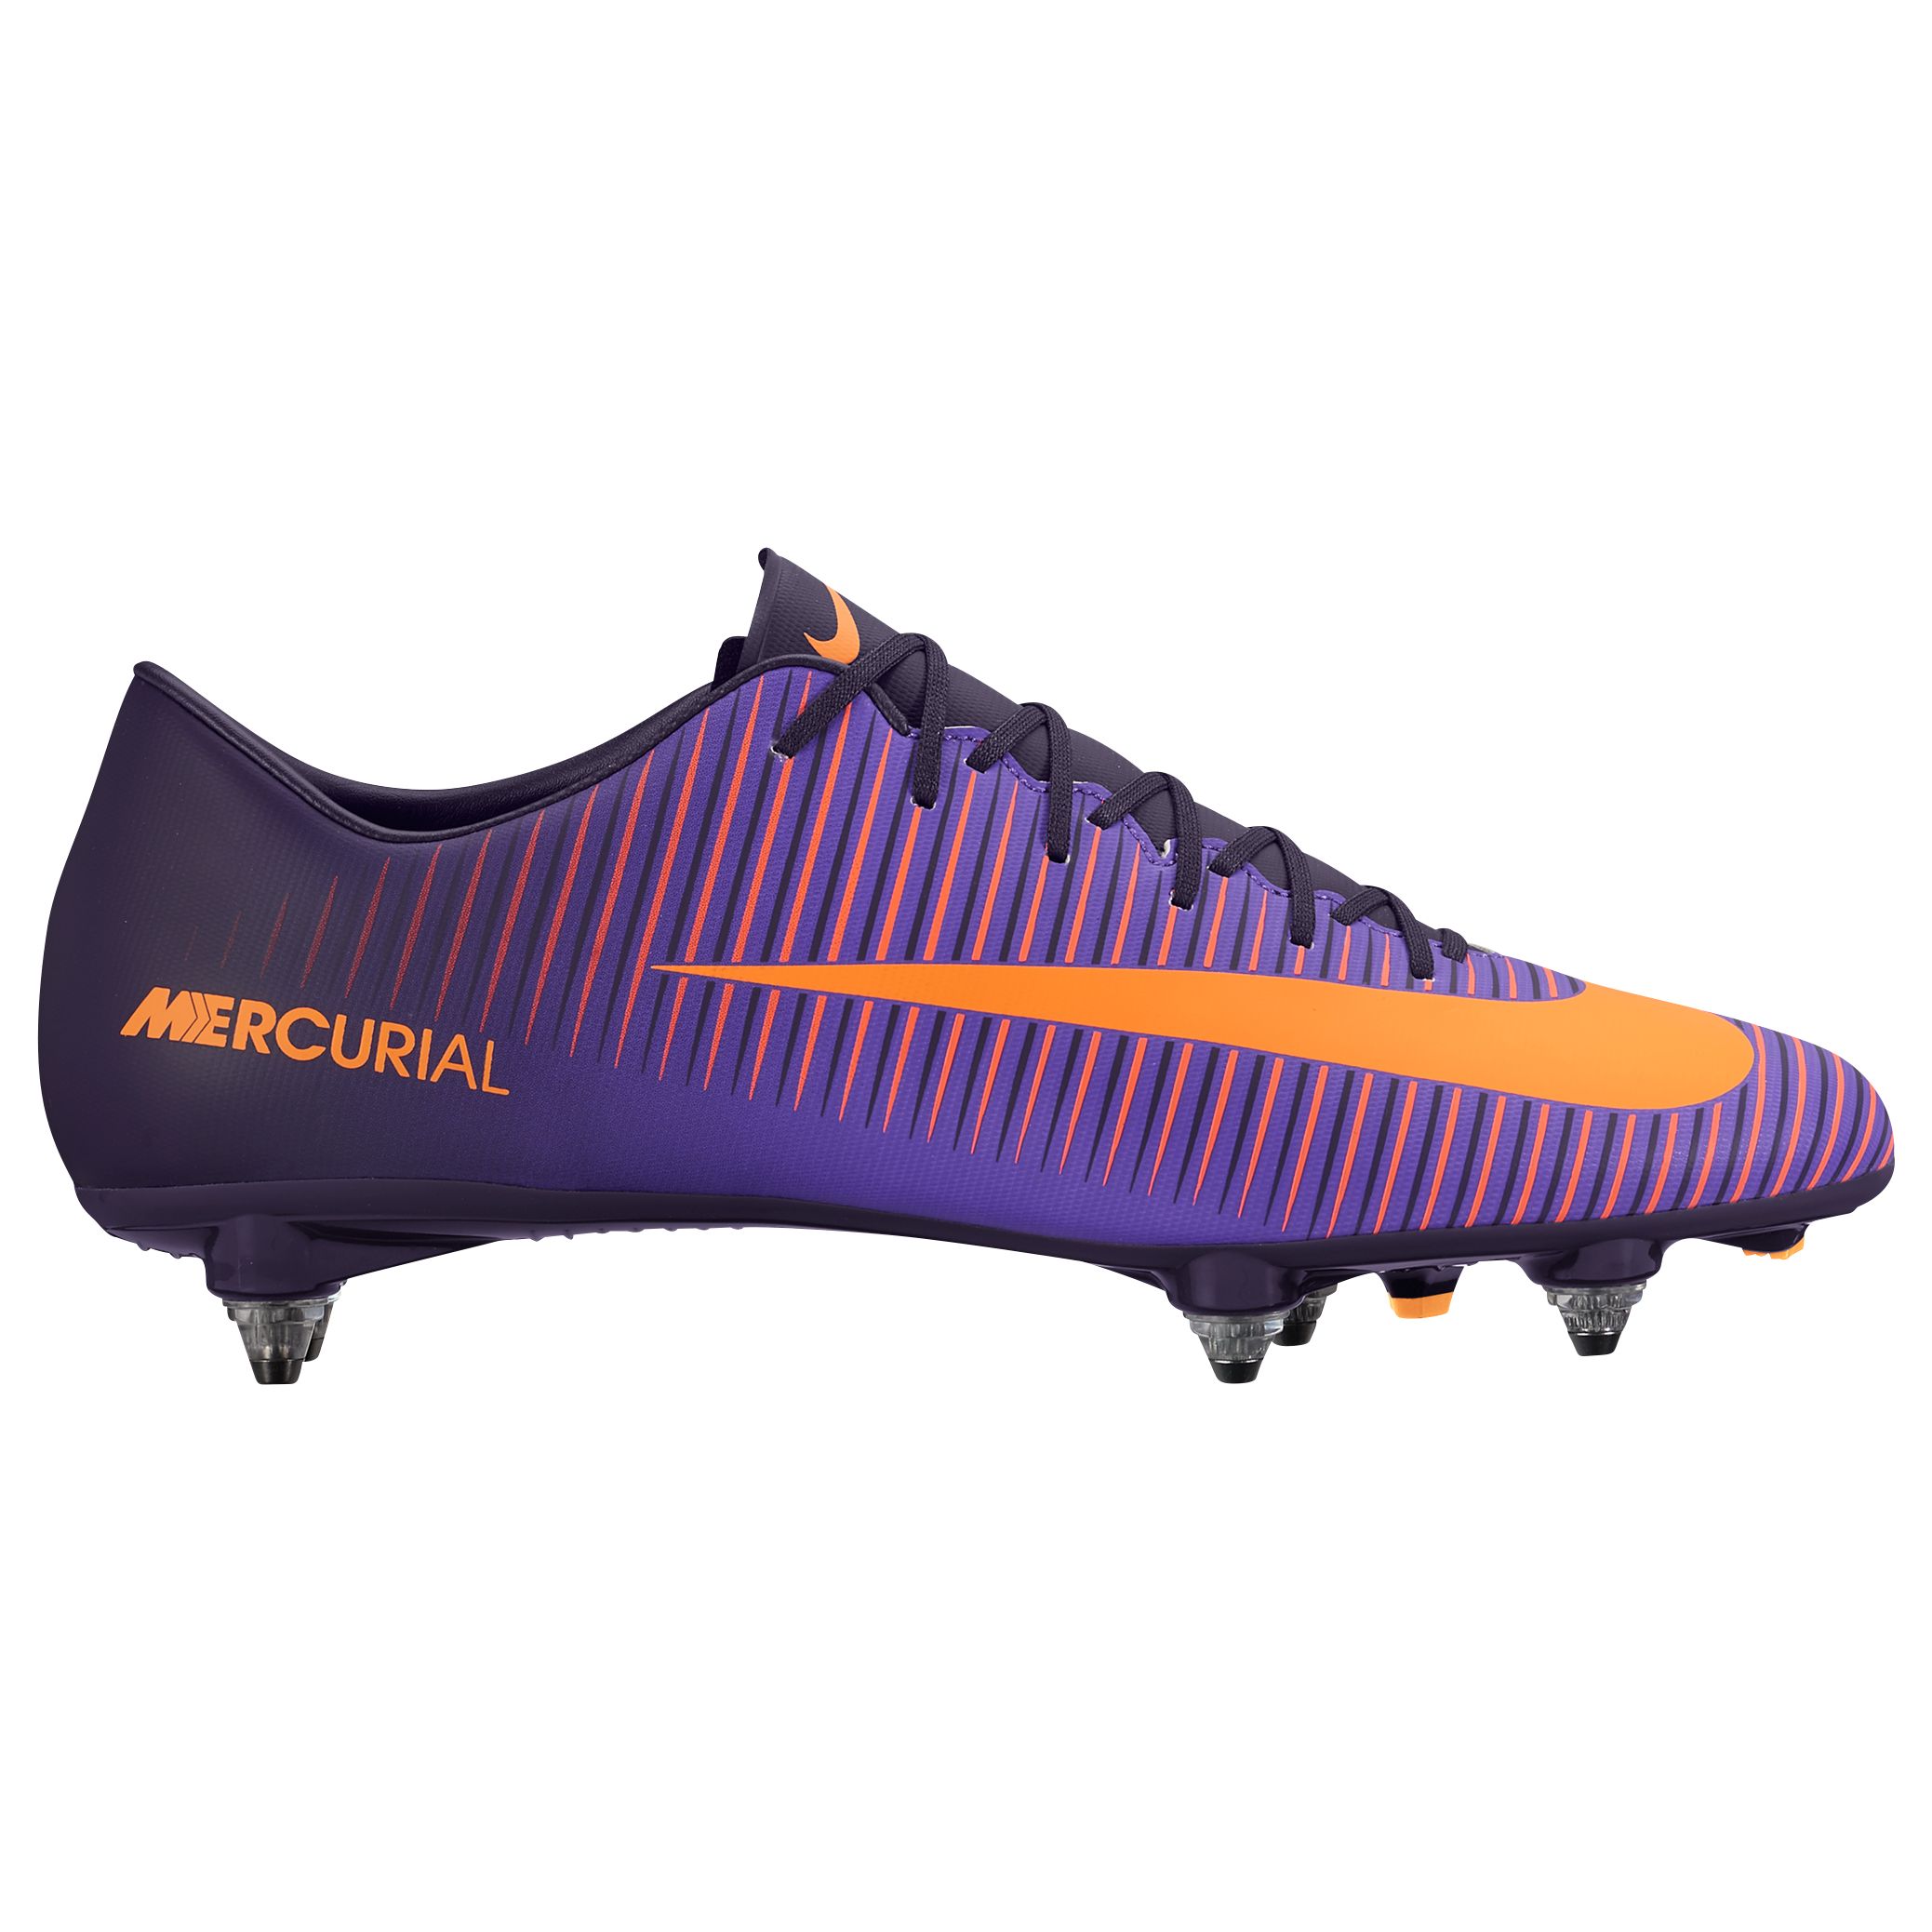 Nike Mercurial Victory VI Men's Soft Ground Football Boots, Purple Dynasty/Bright Citrus